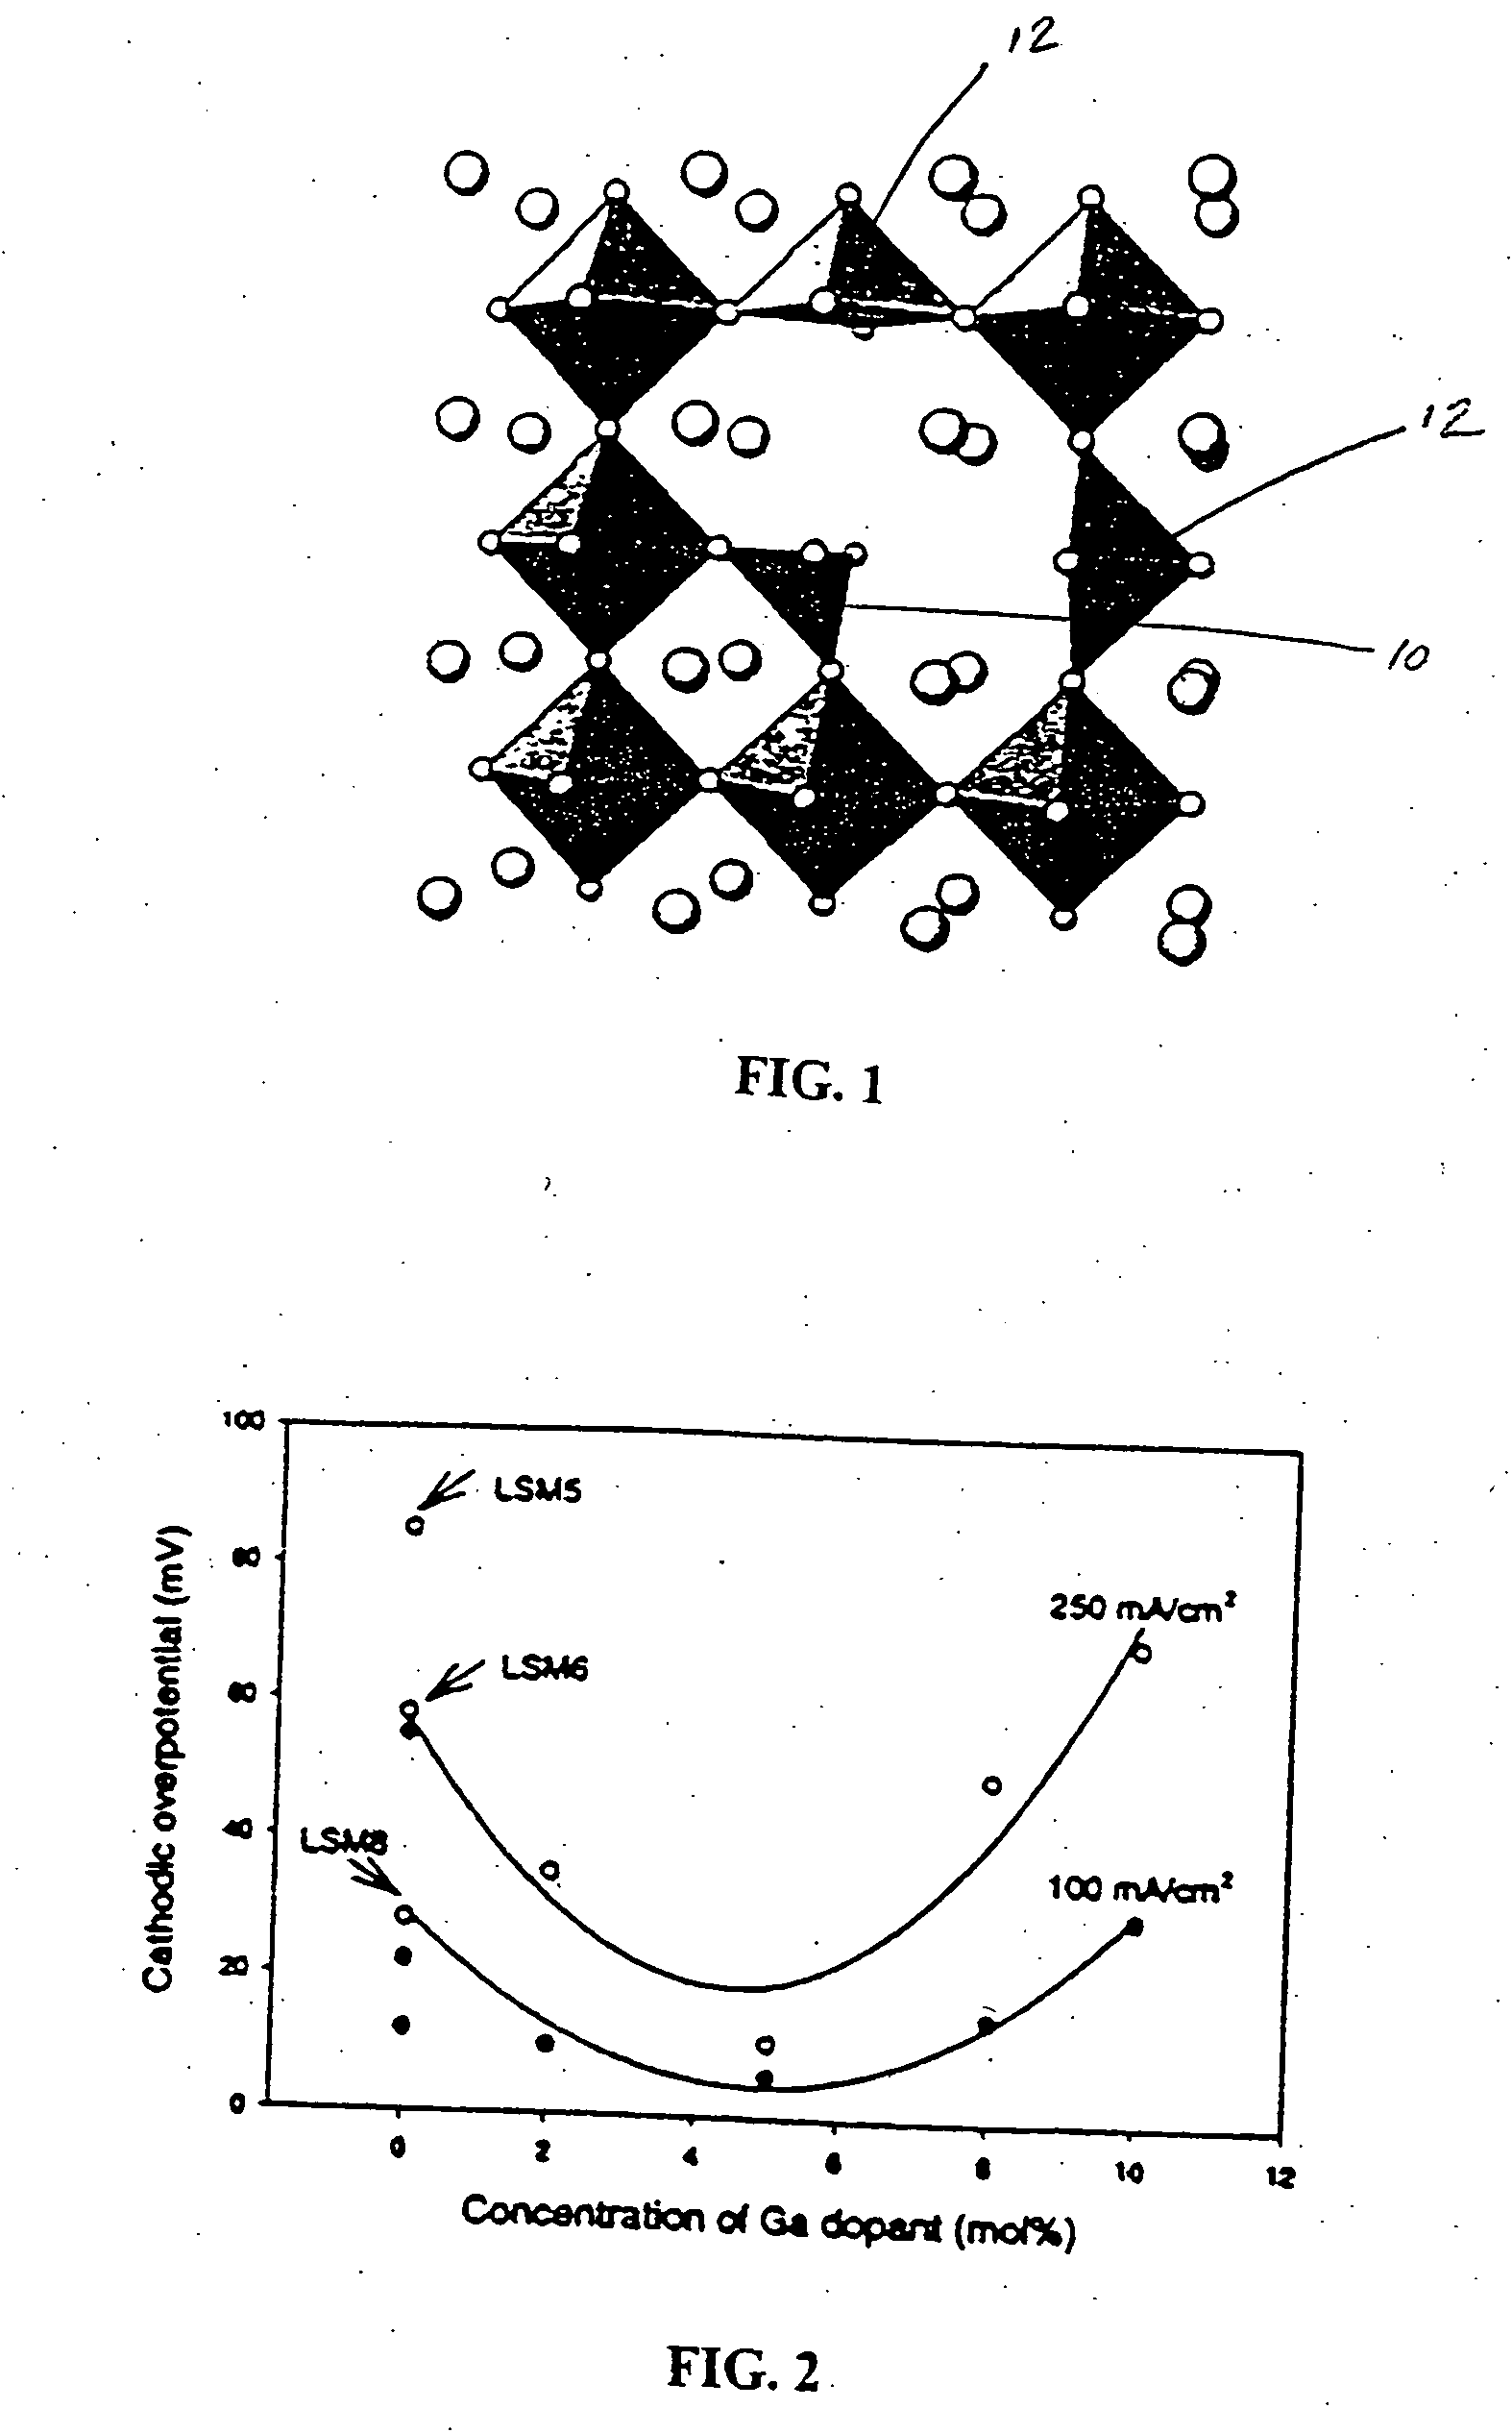 Oxygen ion conducting materials